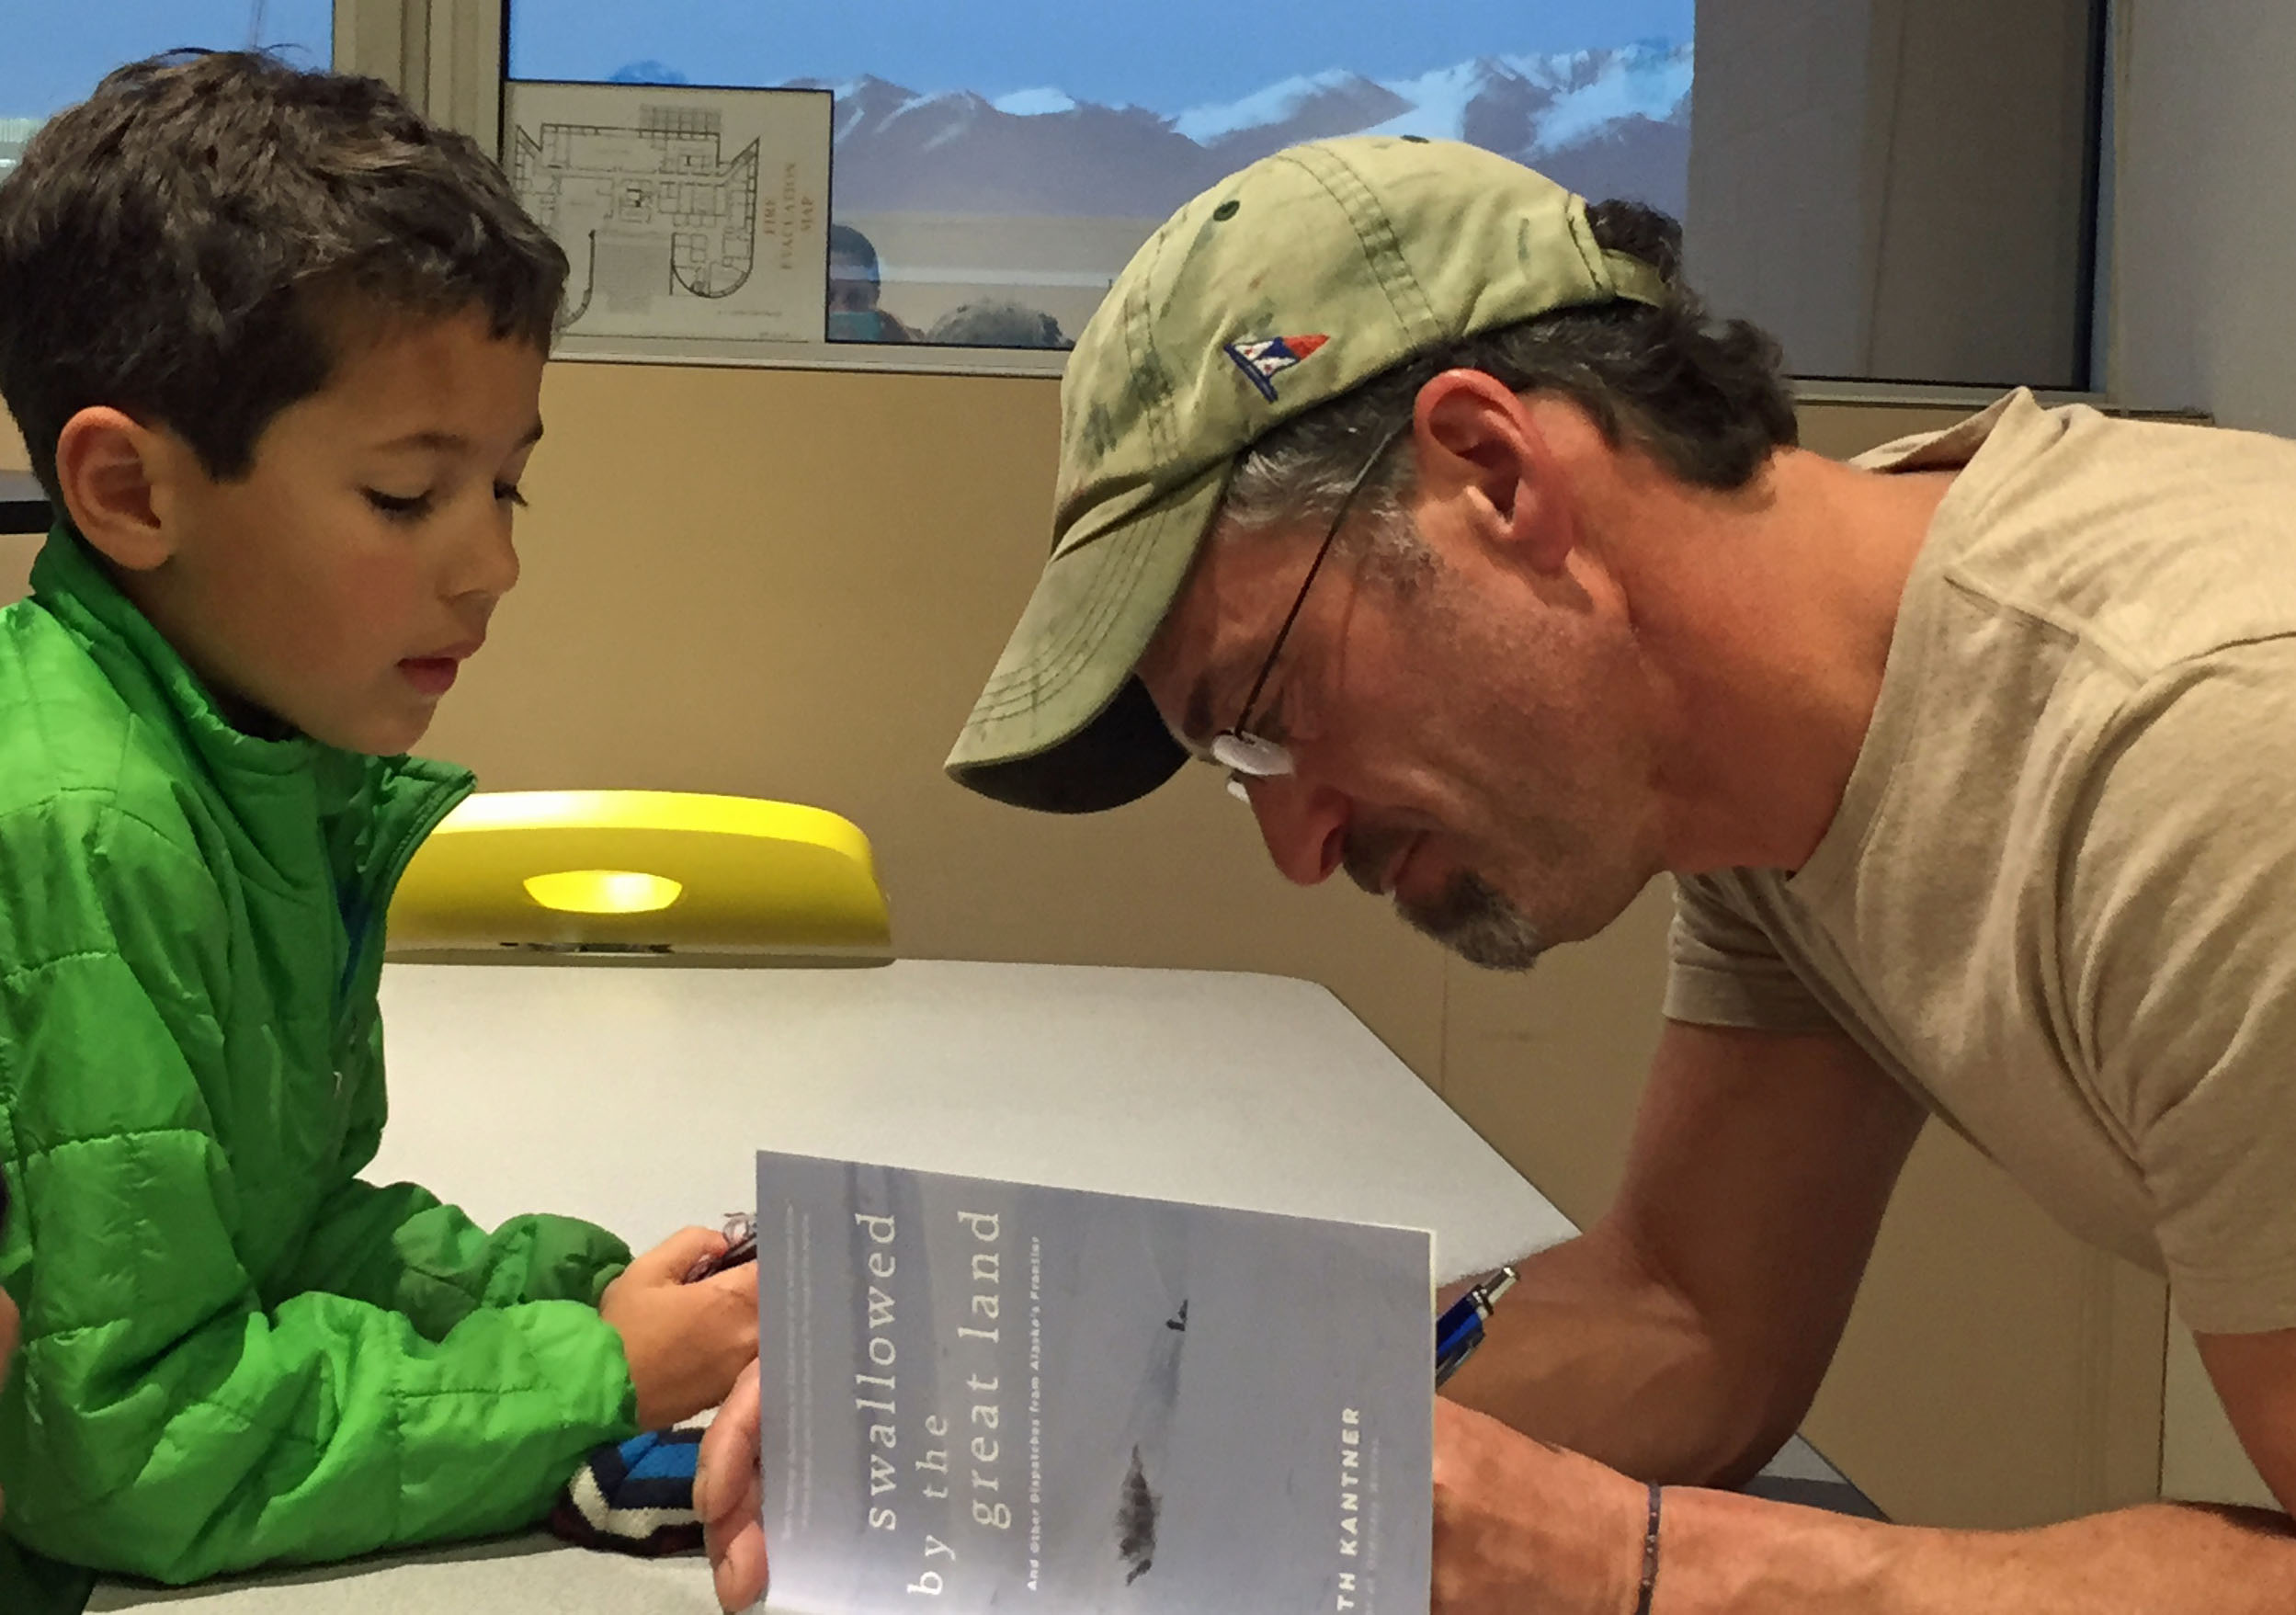 Seth Kantner signs a copy of his new book for a young fan. (Photo by Lori Townsend/APRN)